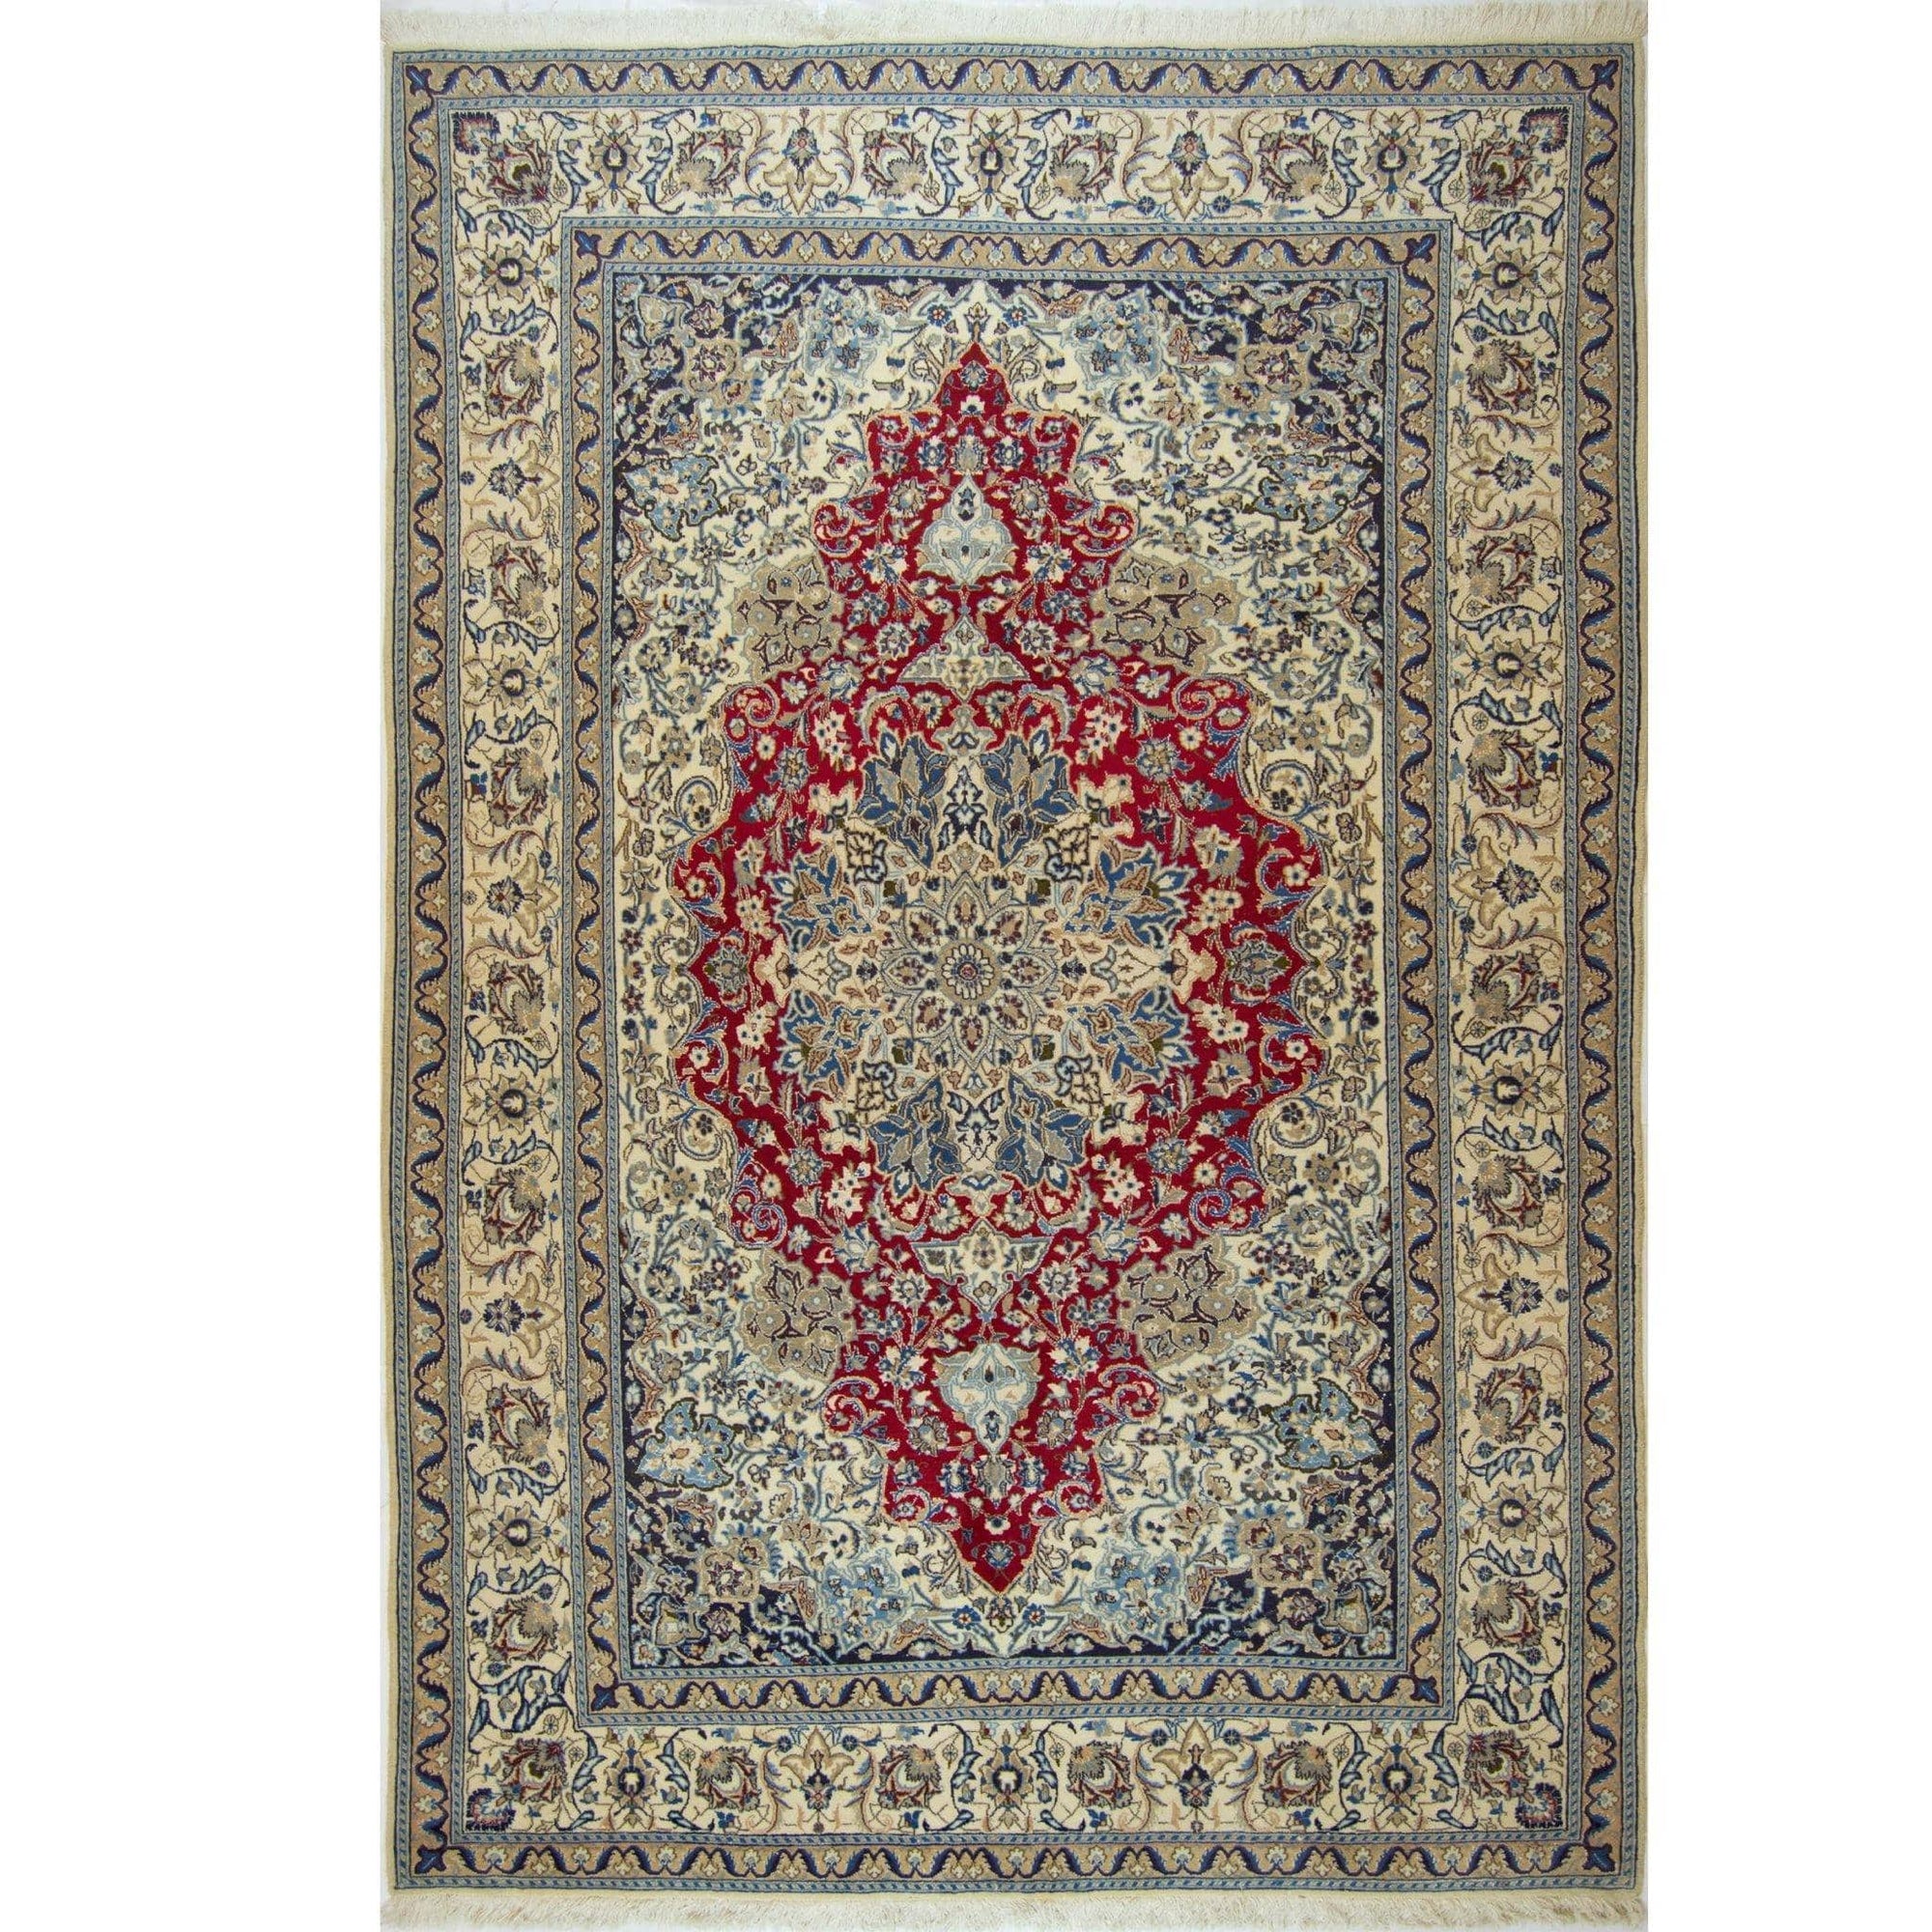 Genuine Fine Hand-knotted Persian Wool & Silk Nain Rug 200cm x 300cm